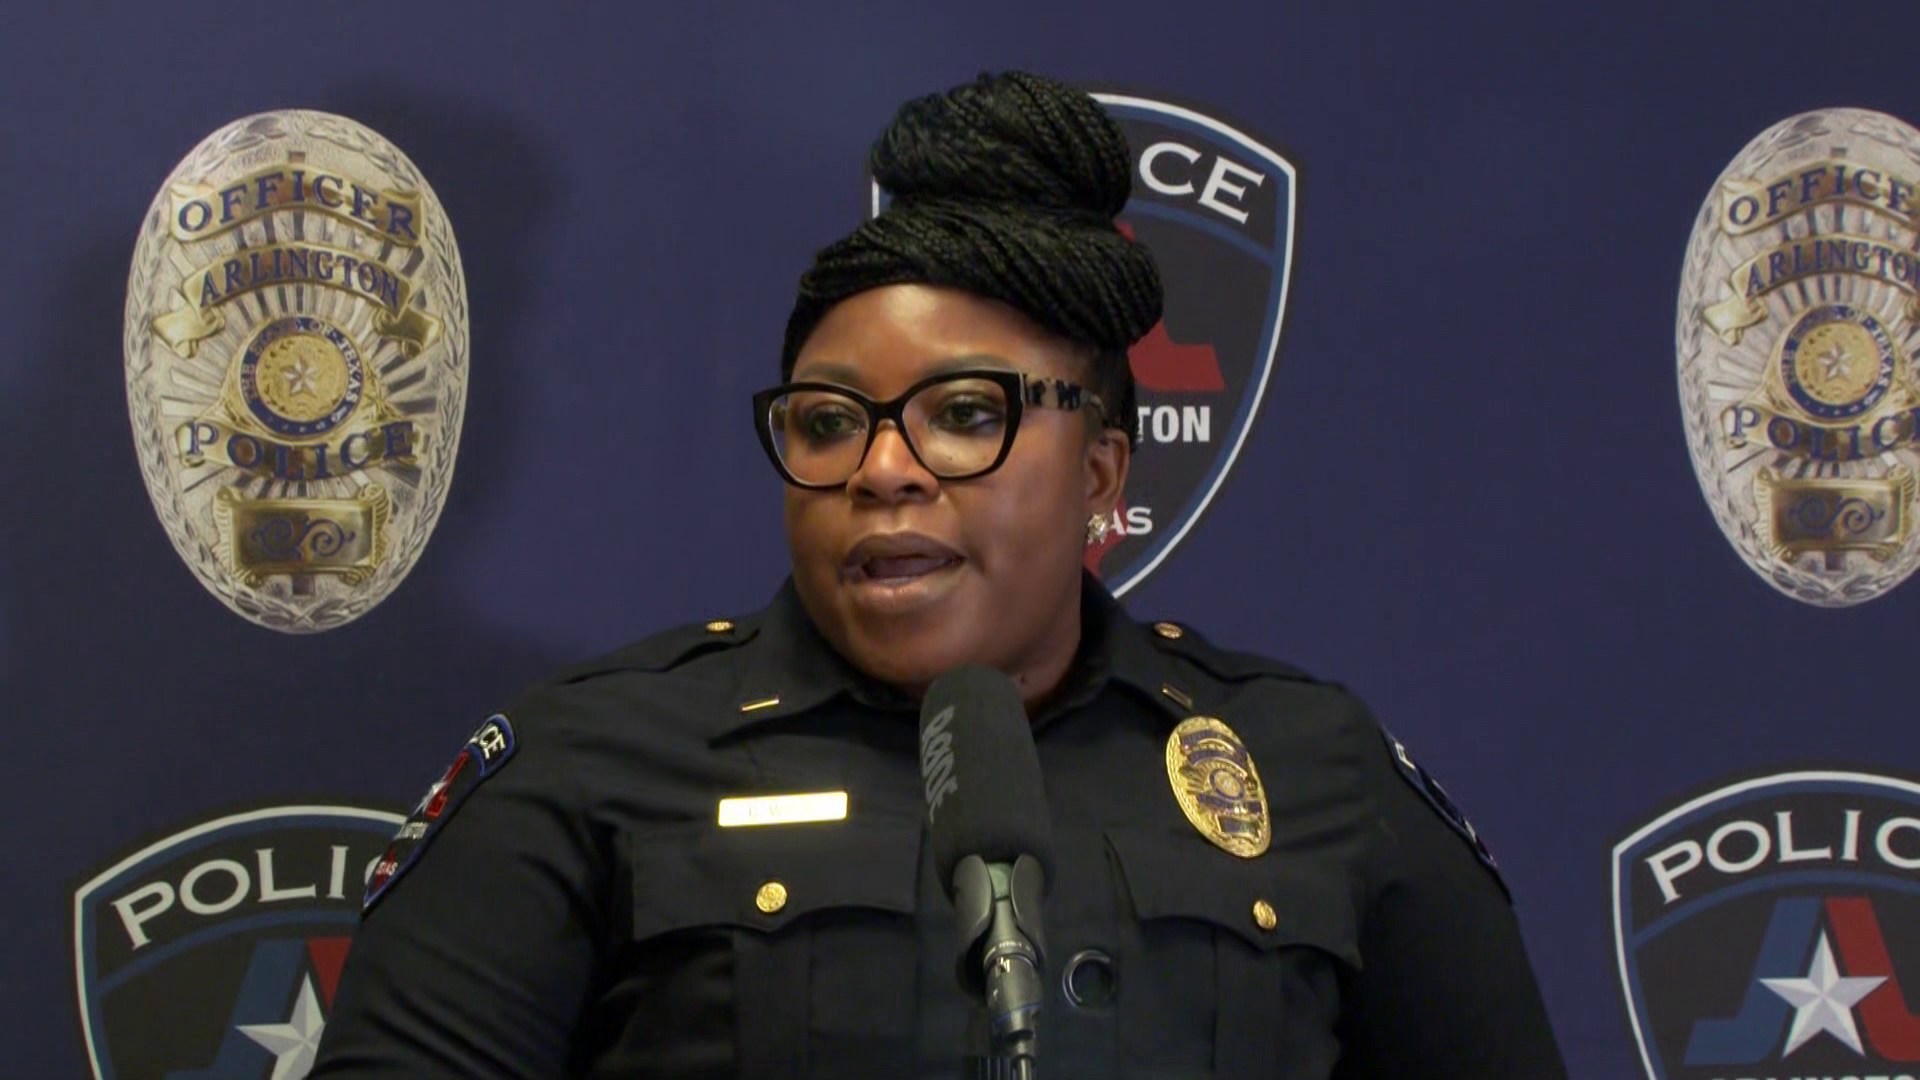 Arlington police fatally shot a suspect they say brandished a knife and moved toward officers who were responding to a possible stabbing at an apartment complex.